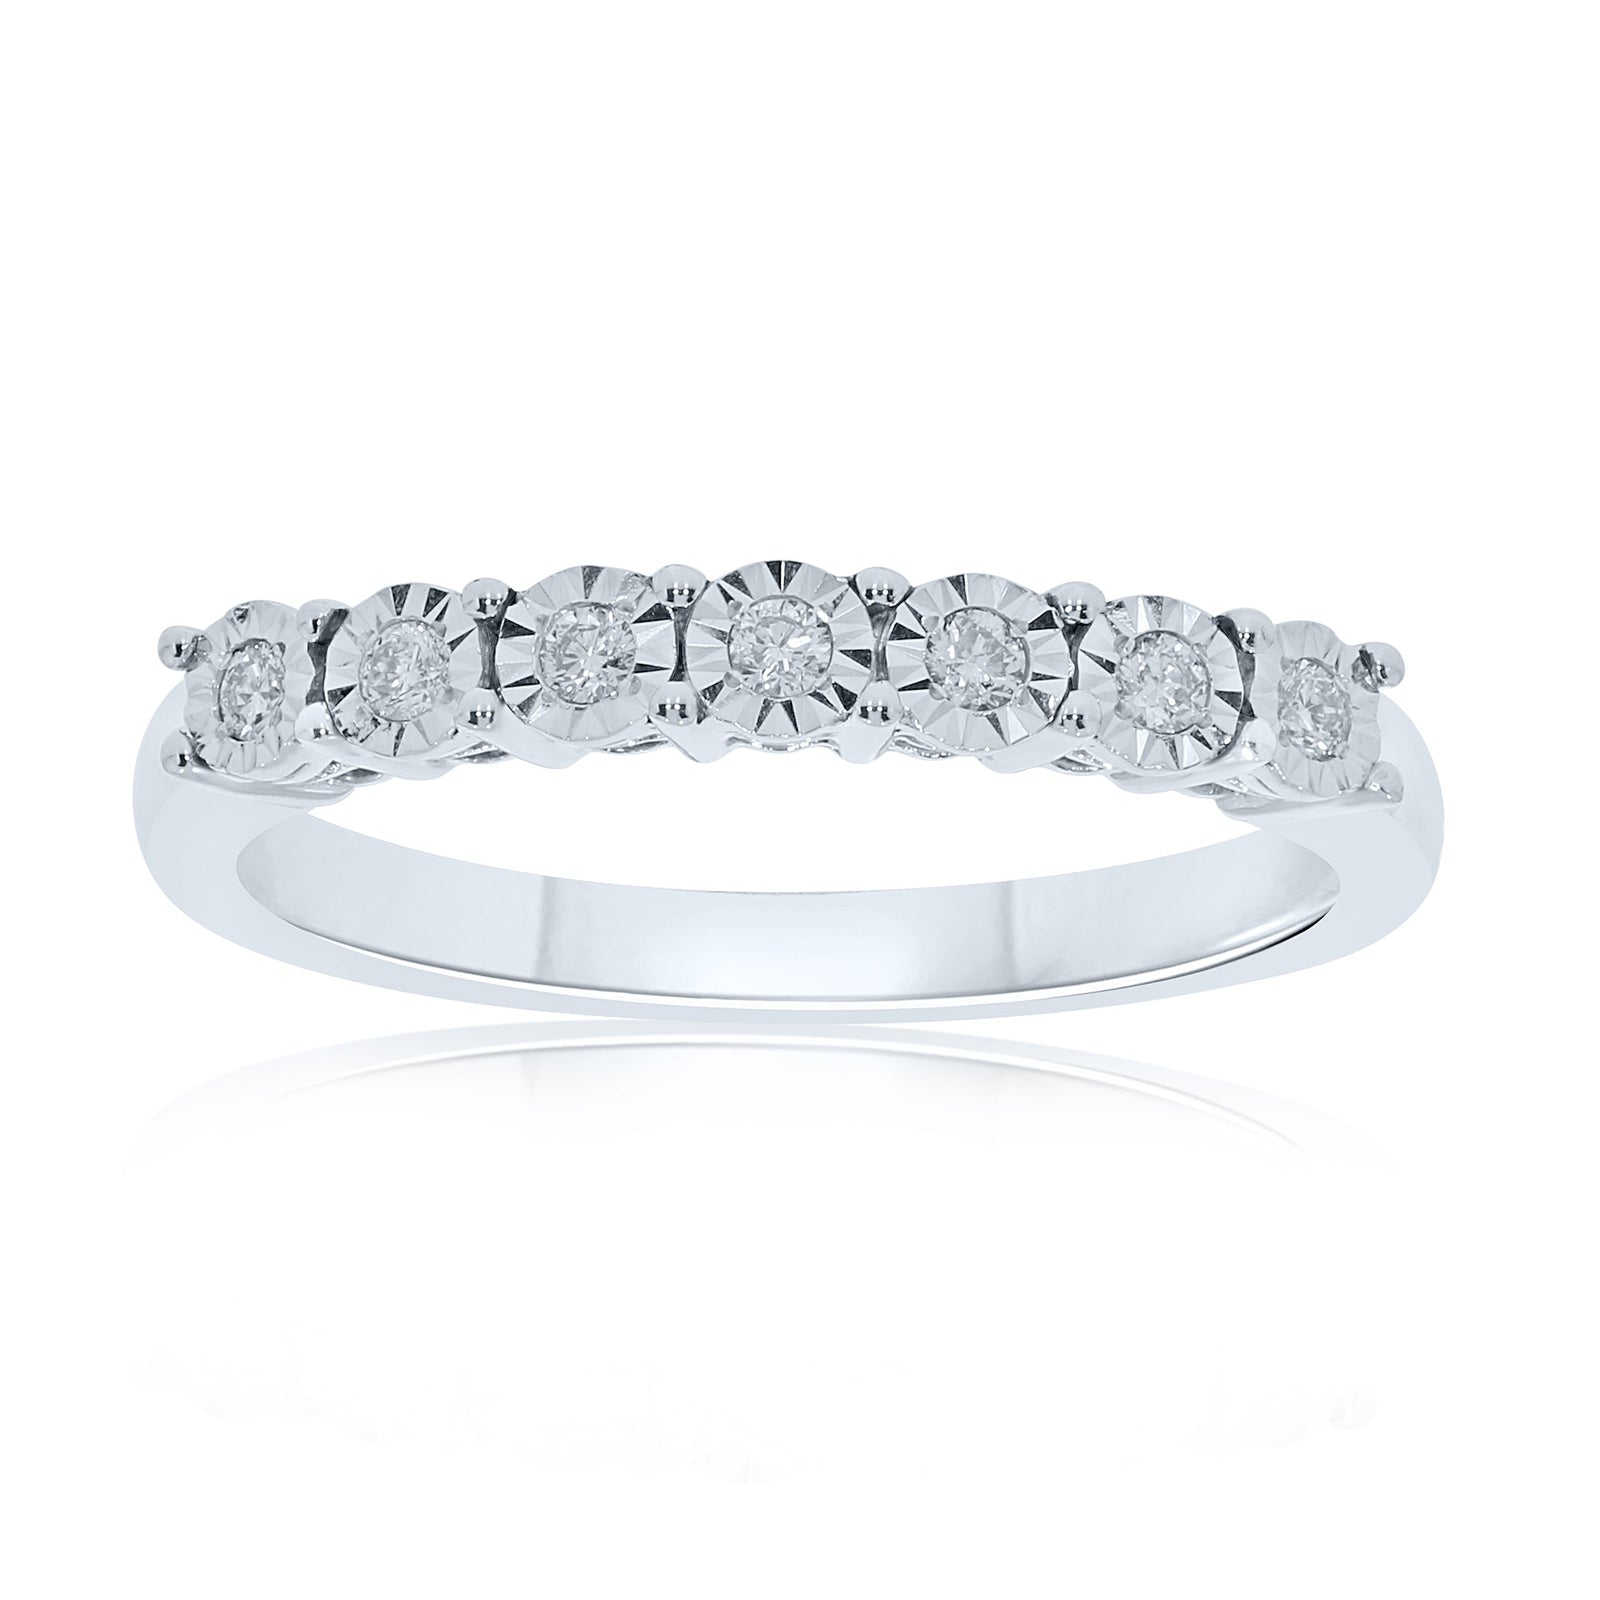 9ct white gold 7 stone miracle plate diamond ring 0.15ct